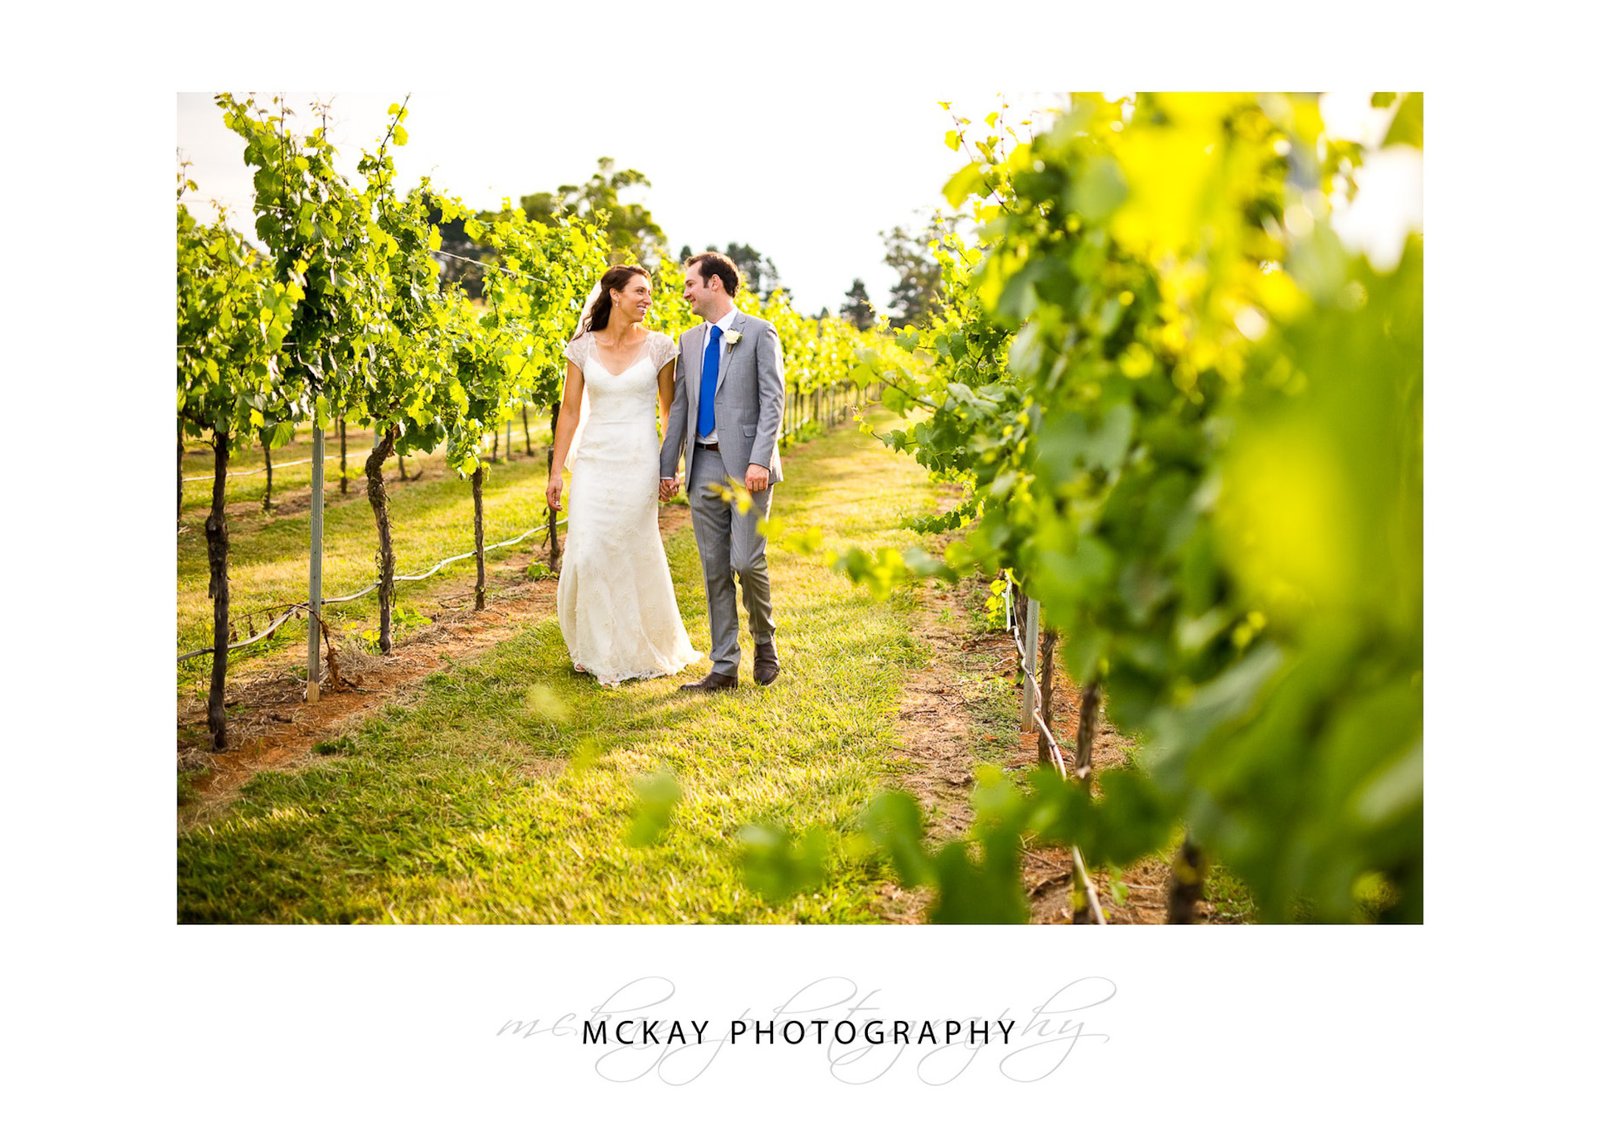 Walking in the grape vine rows at Bendooley Estate